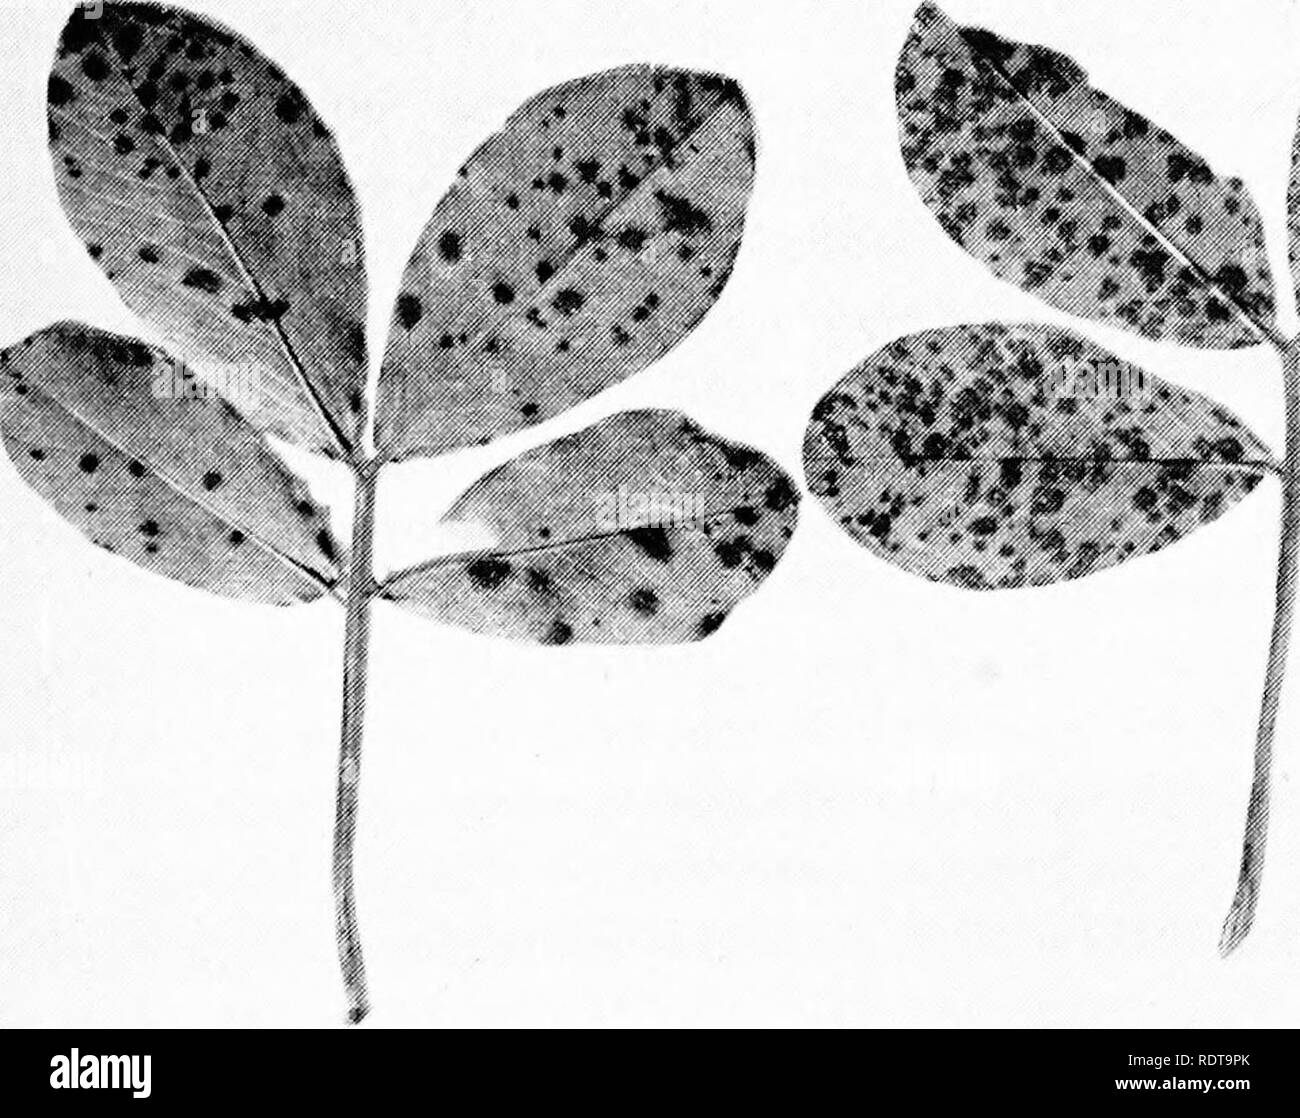 . The Peanut, the unpredictable legume; a symposium. Peanuts; Peanuts. PEANUT DISEASES 273 At maturity early leafspots are reddish-brown to black, and lighter brown to tan with less distinct halos on the lower surface. Late leafspots are soon very dark brown to almost black on both surfaces. Cushions of conidiophores are formed at first only on the upper sur- face in early leafspot, but sometimes form on the lower surfaces of older spots. In late leafspot, however, conidiophores are almost always confined to the lower leaf surfaces, and the cushions of tufts usually are in plainly visible conc Stock Photo